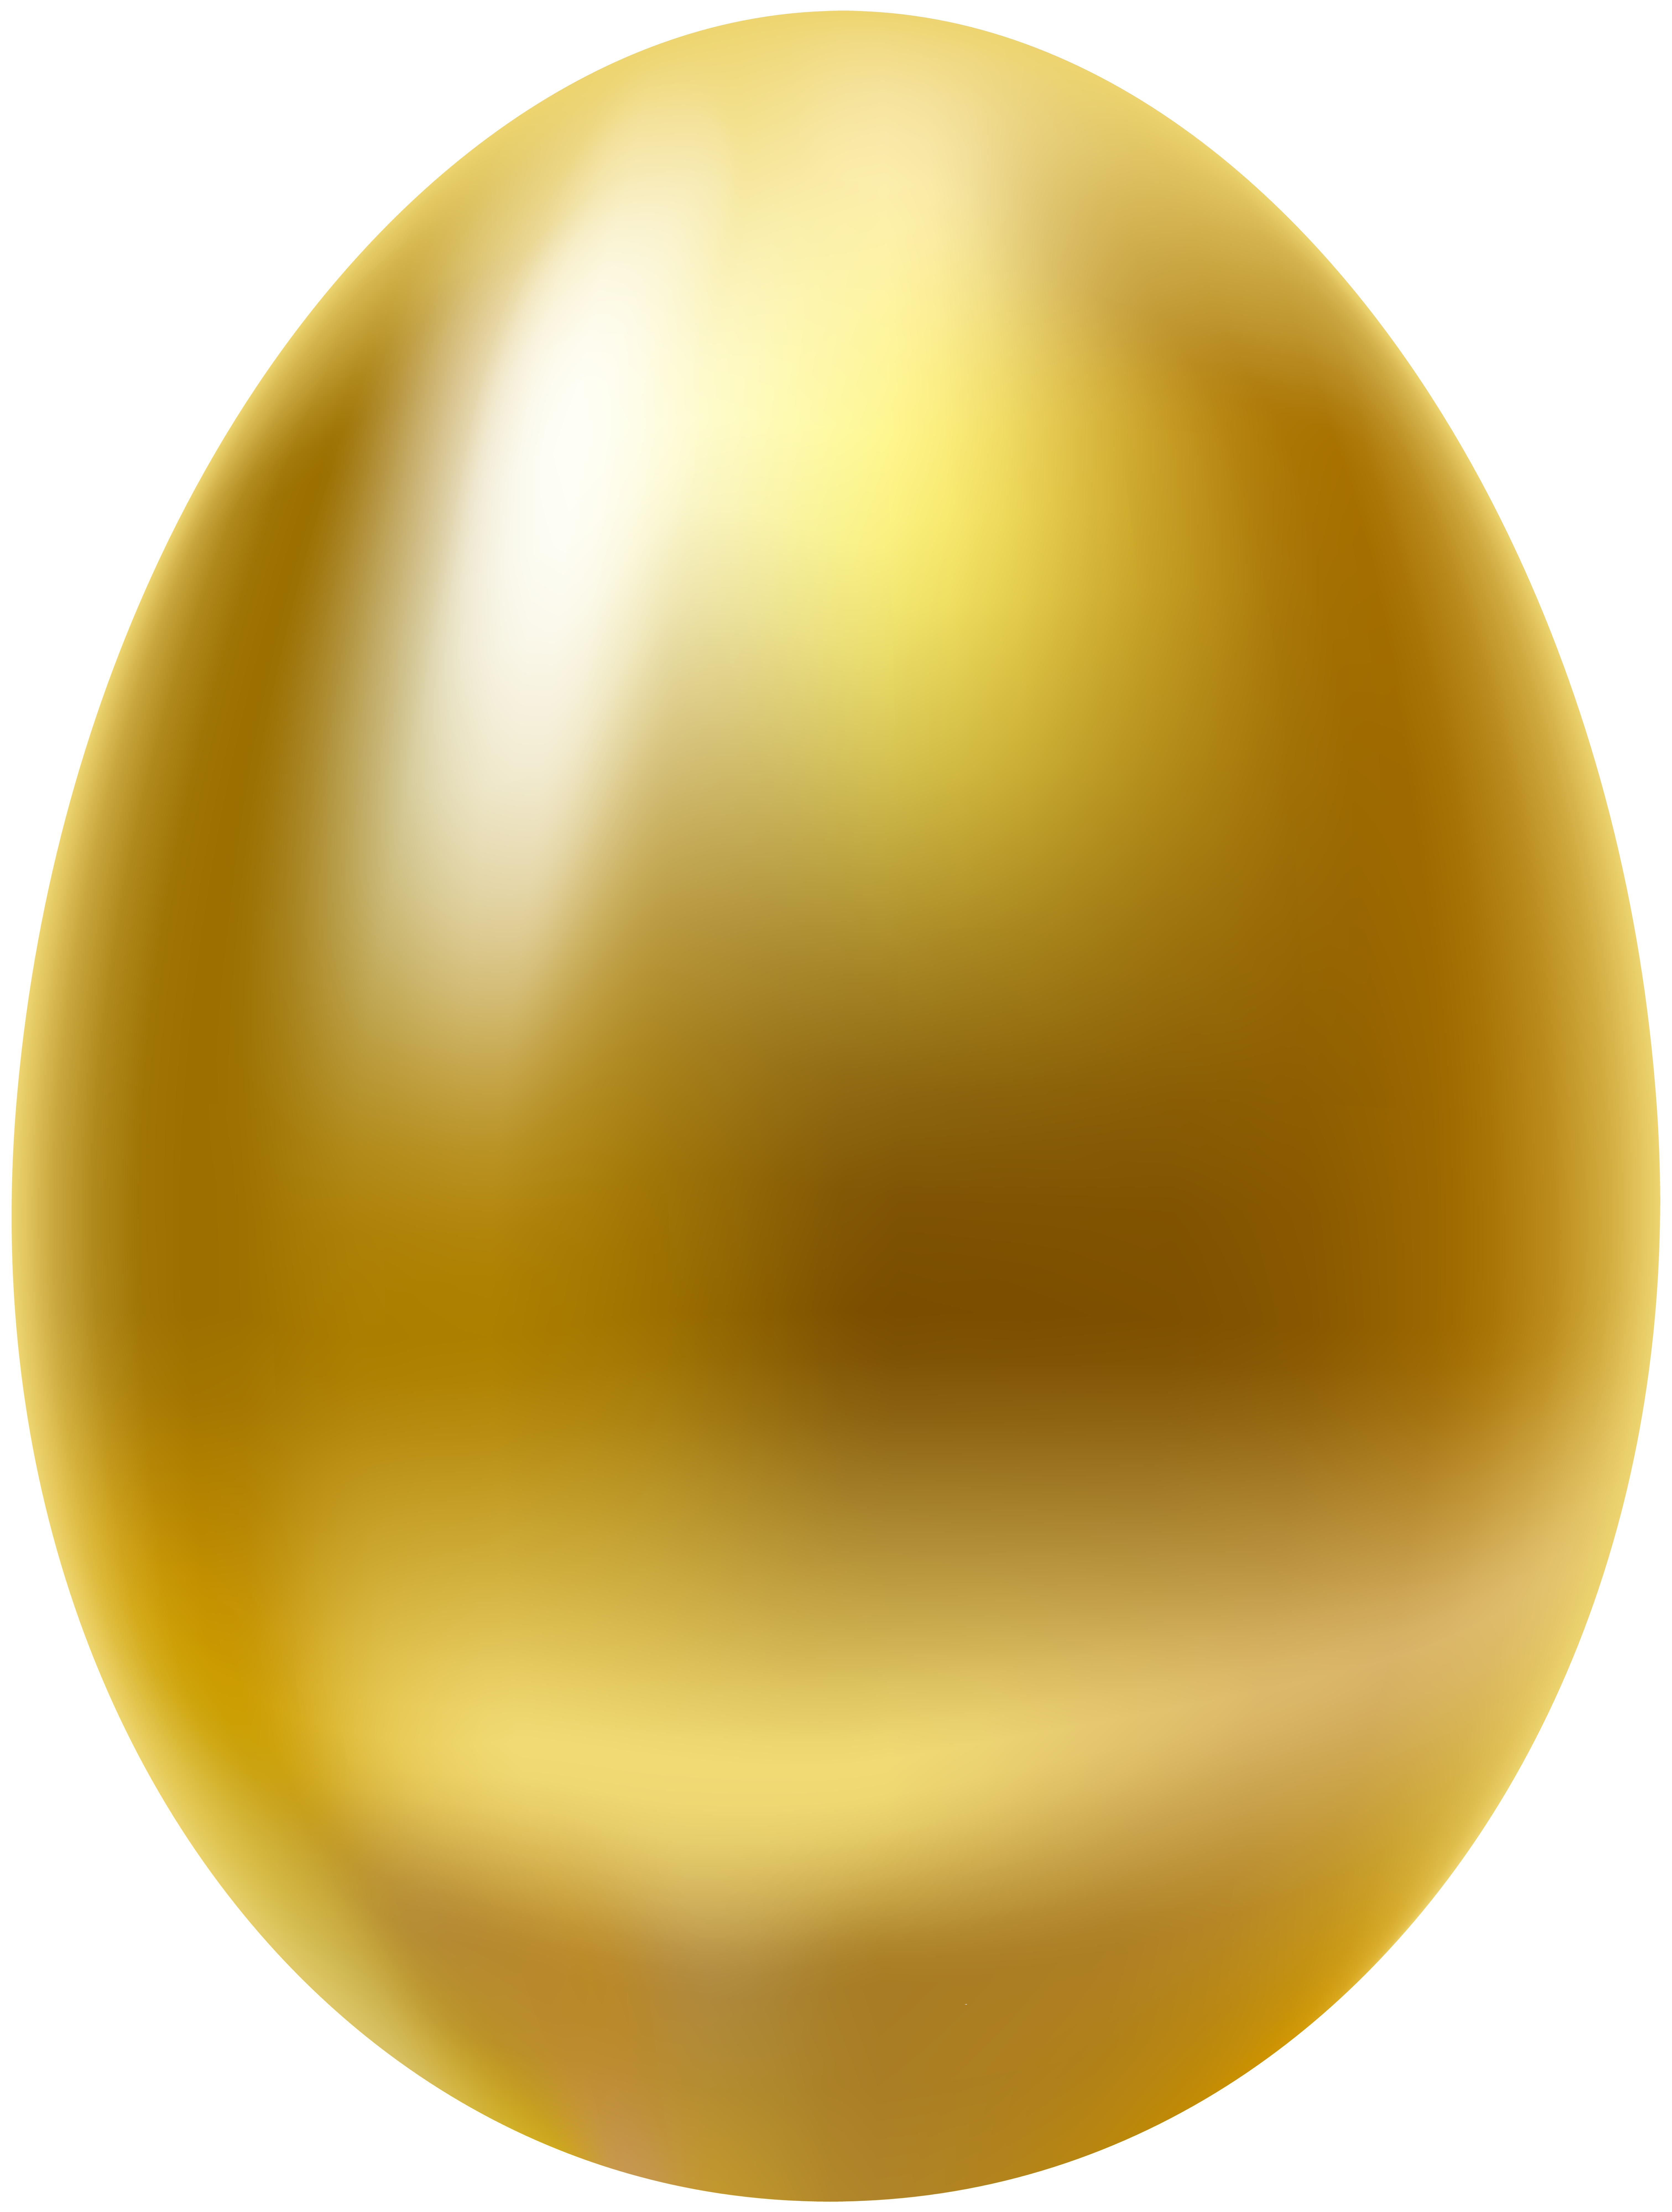 Gold Easter Egg Clip Art Image Quality Image And Transparent PNG Free Clipart